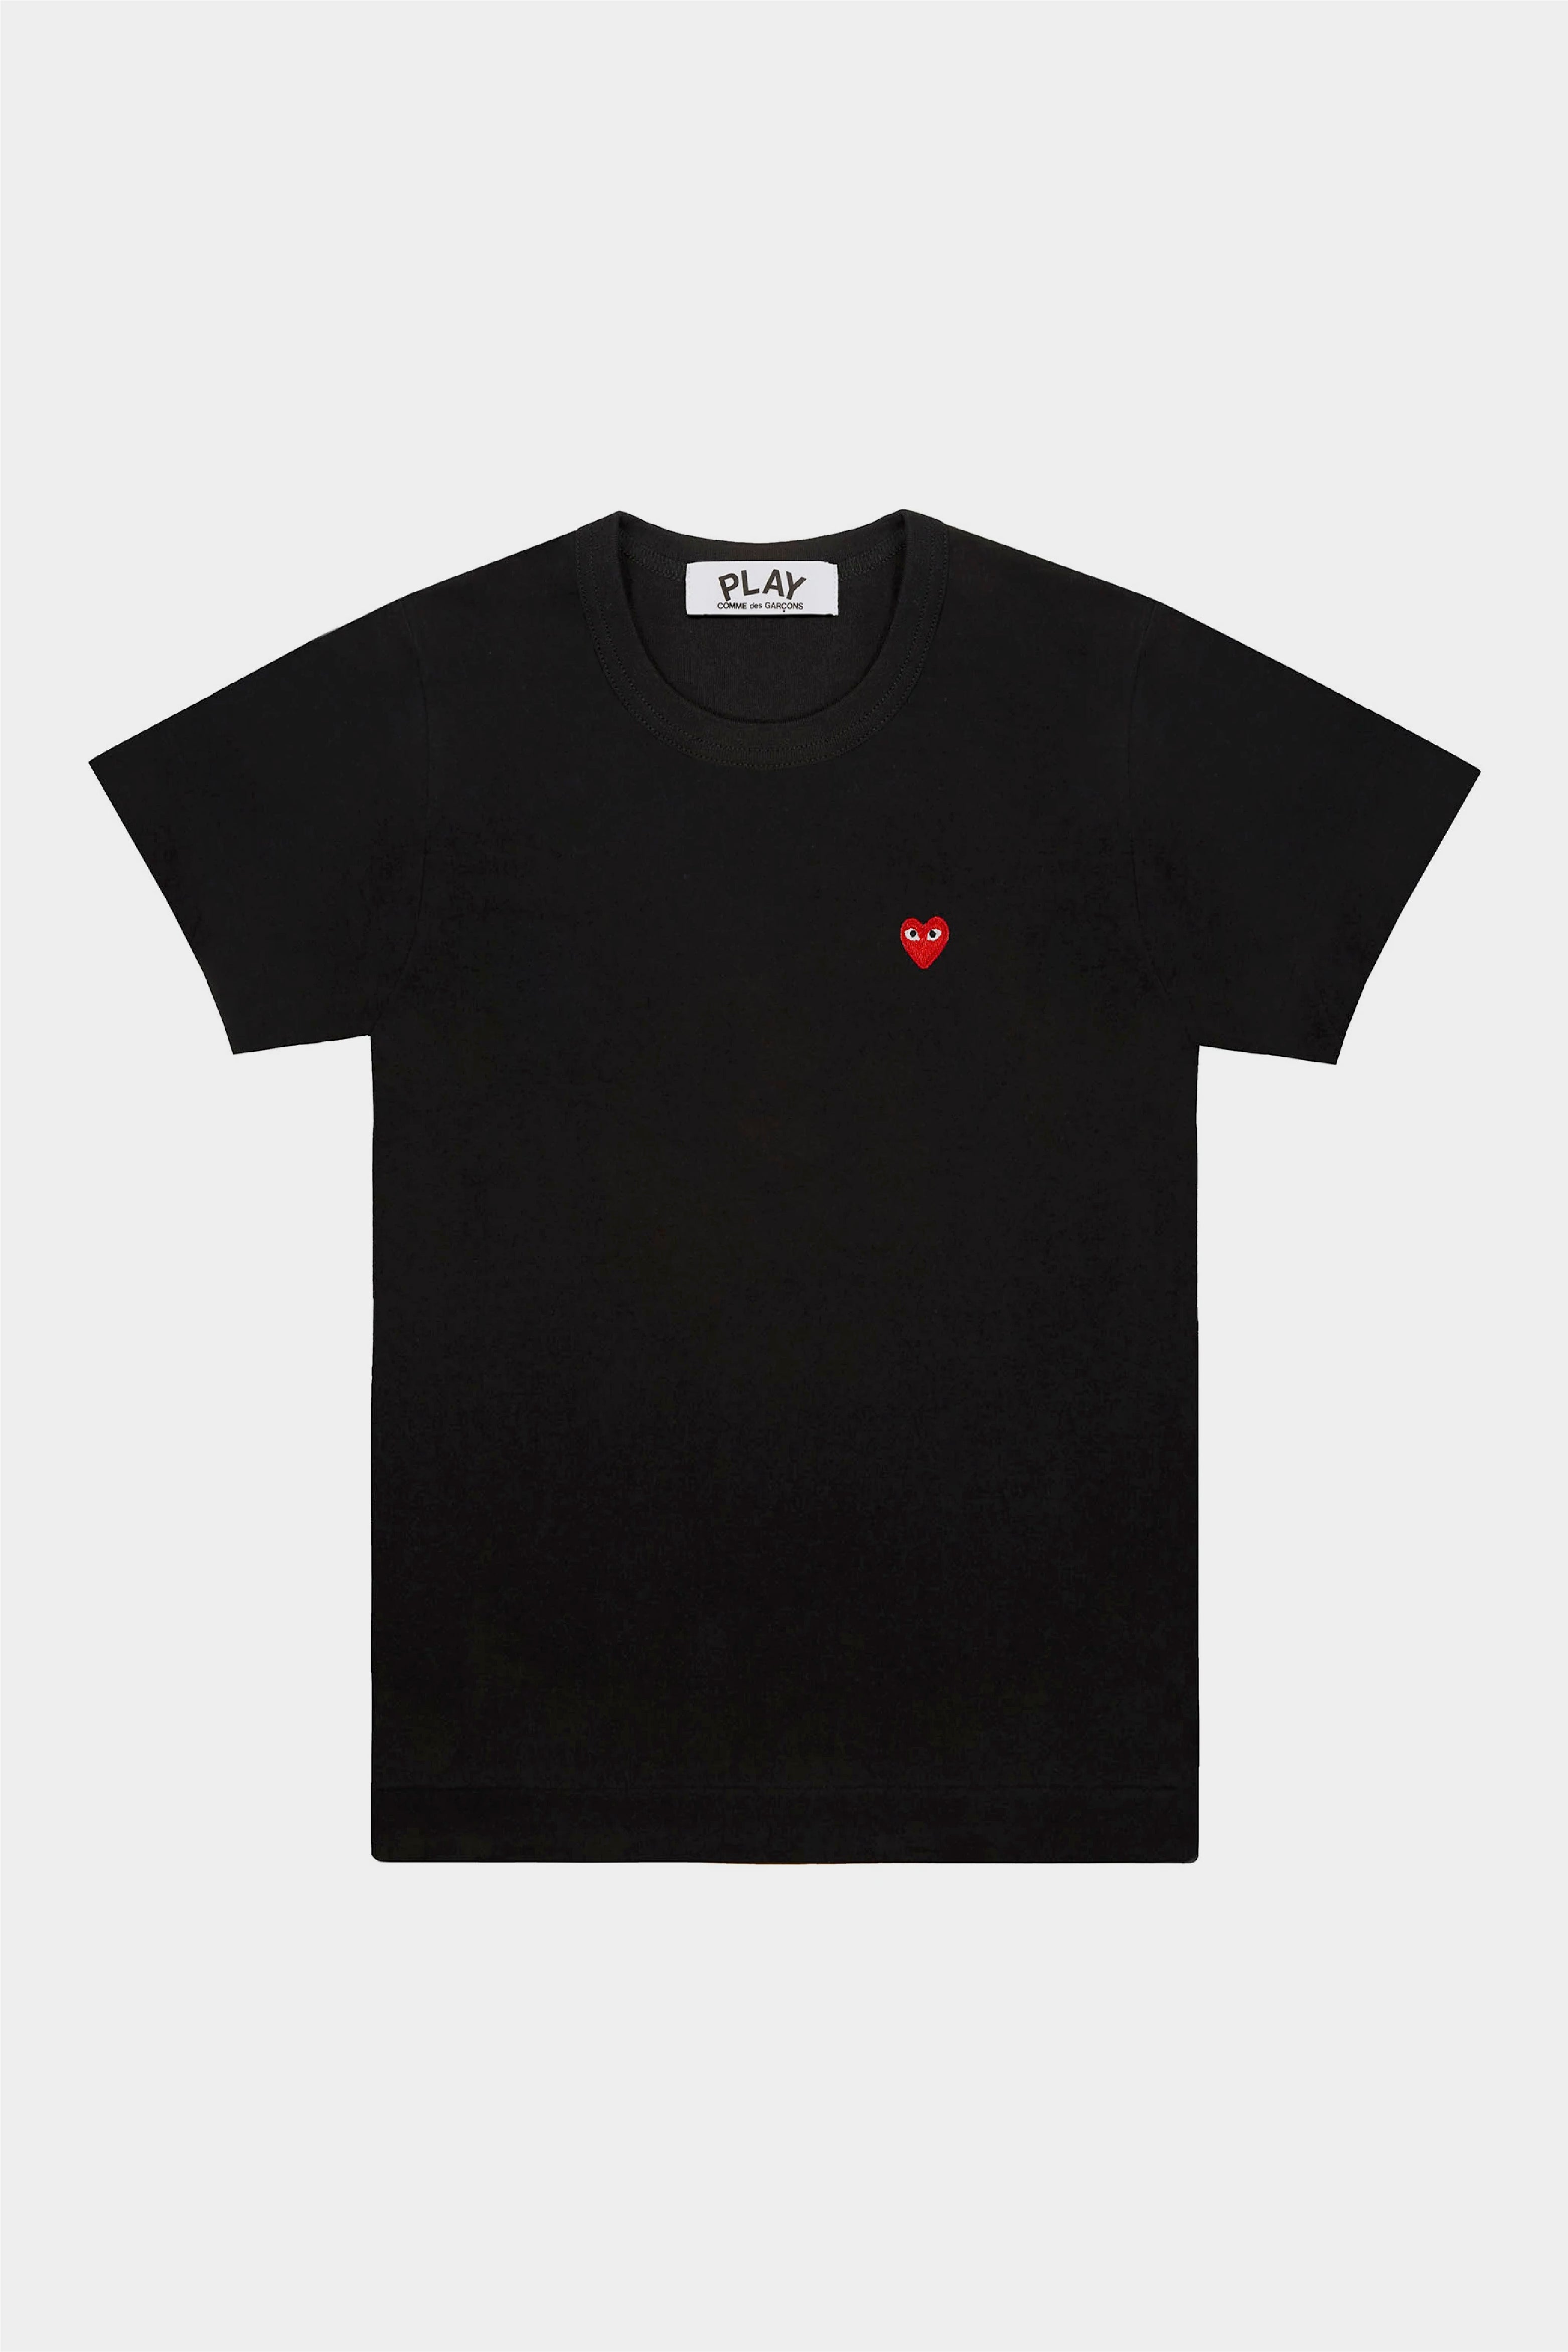 Selectshop FRAME - COMME DES GARCONS PLAY Small Red Heart T-Shirt T-Shirts Dubai